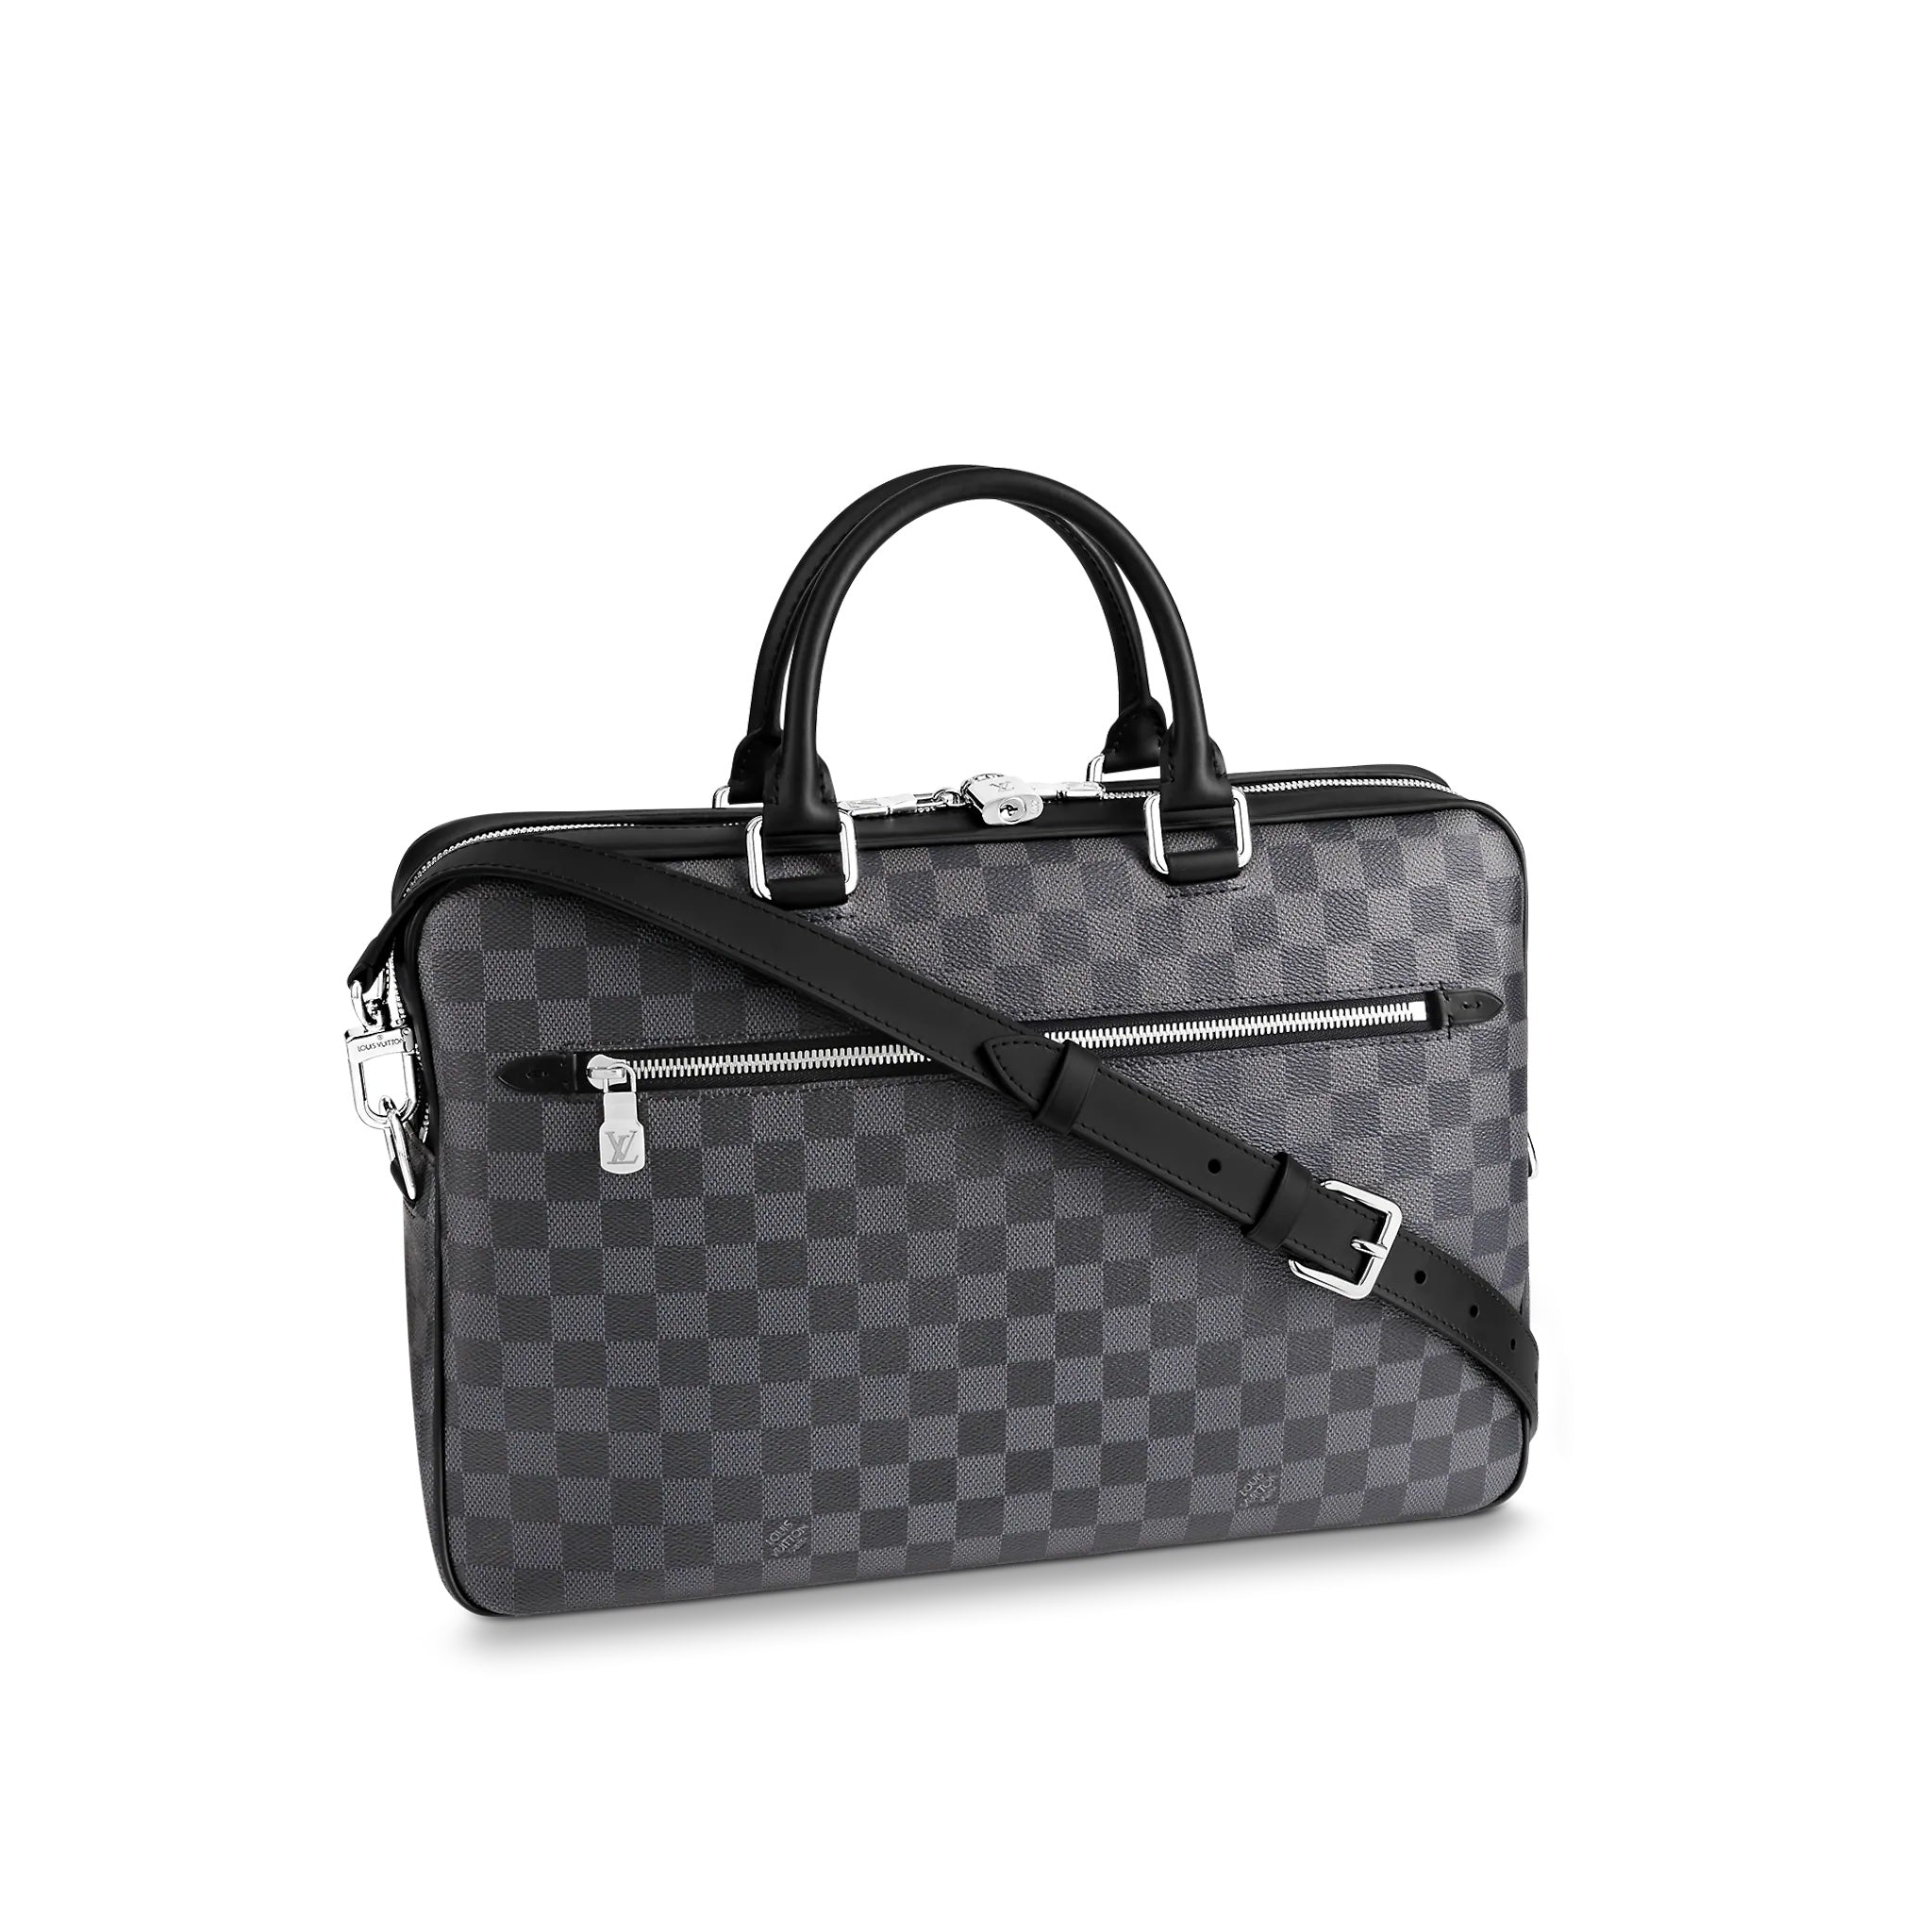 Porte-Documents Voyage PM - Luxury Business Bags - Bags